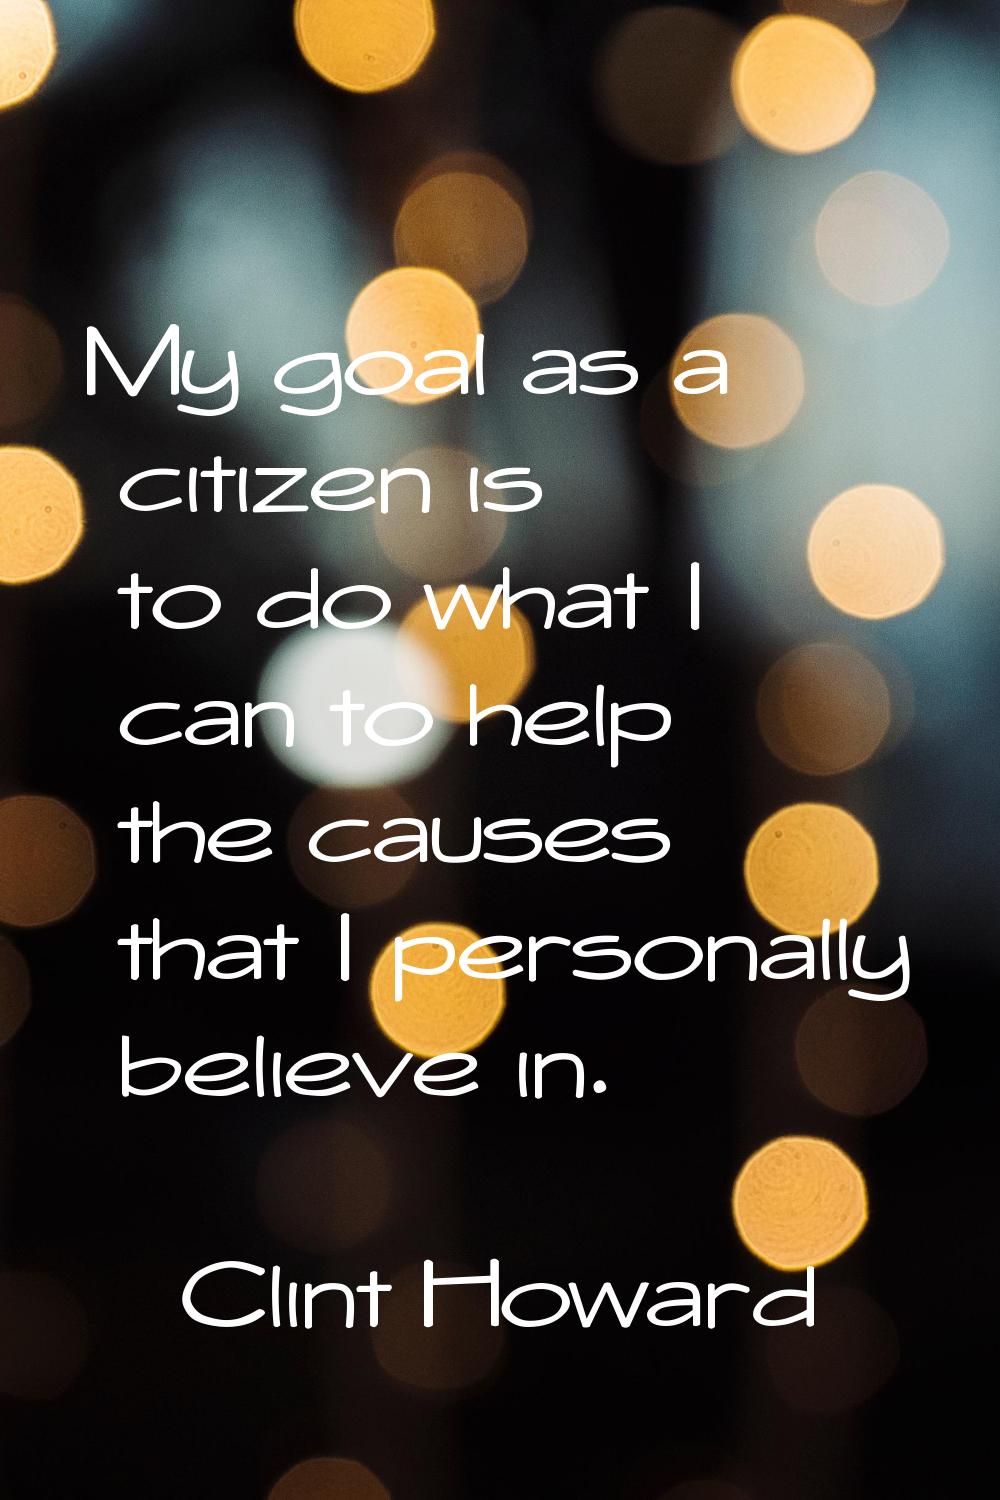 My goal as a citizen is to do what I can to help the causes that I personally believe in.